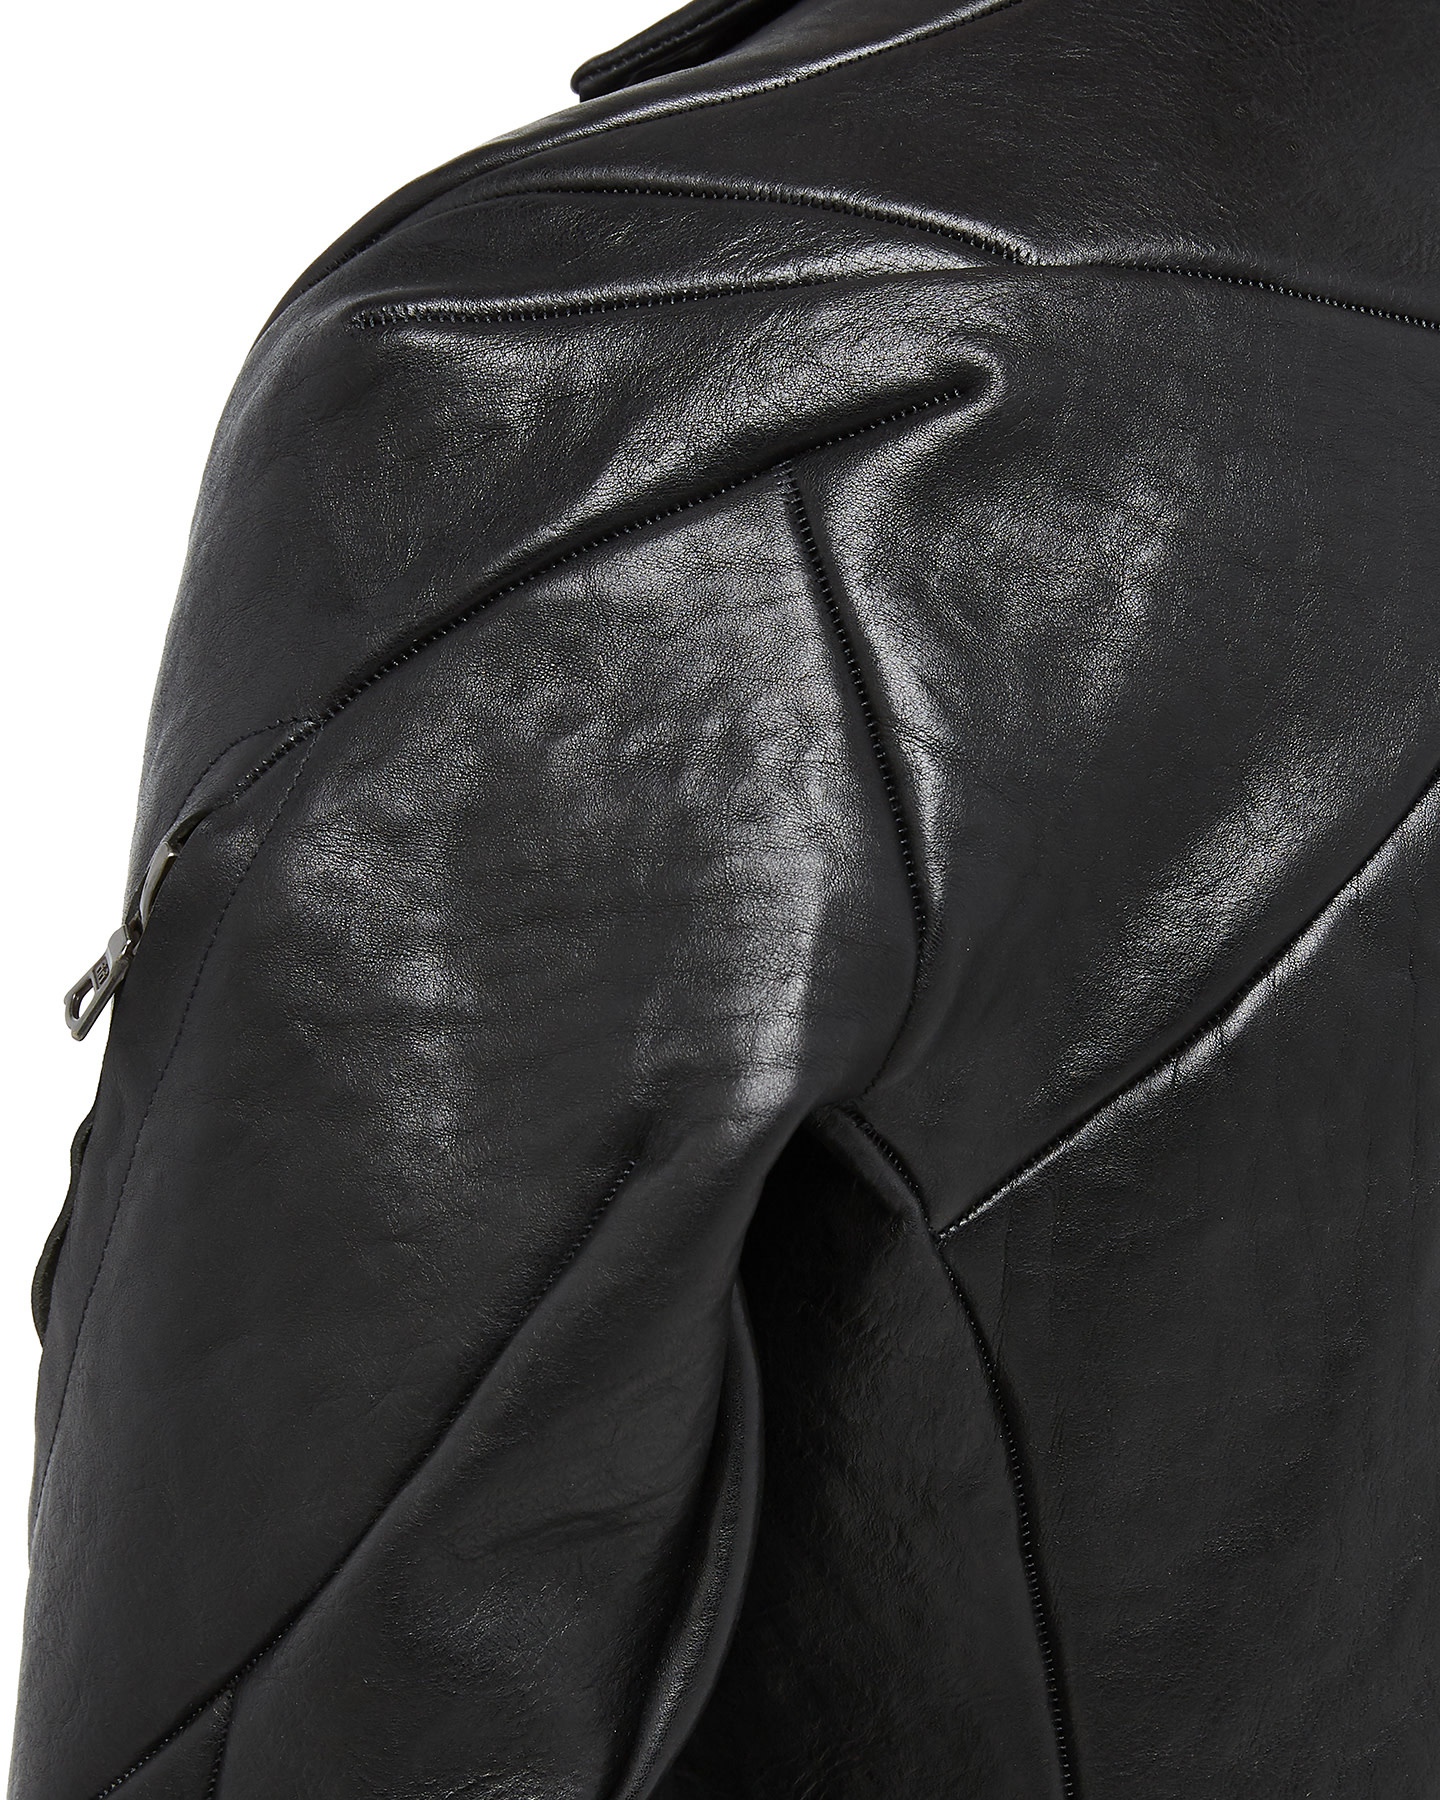 Distorted Motocycle Leather Jacket - Ready to Wear